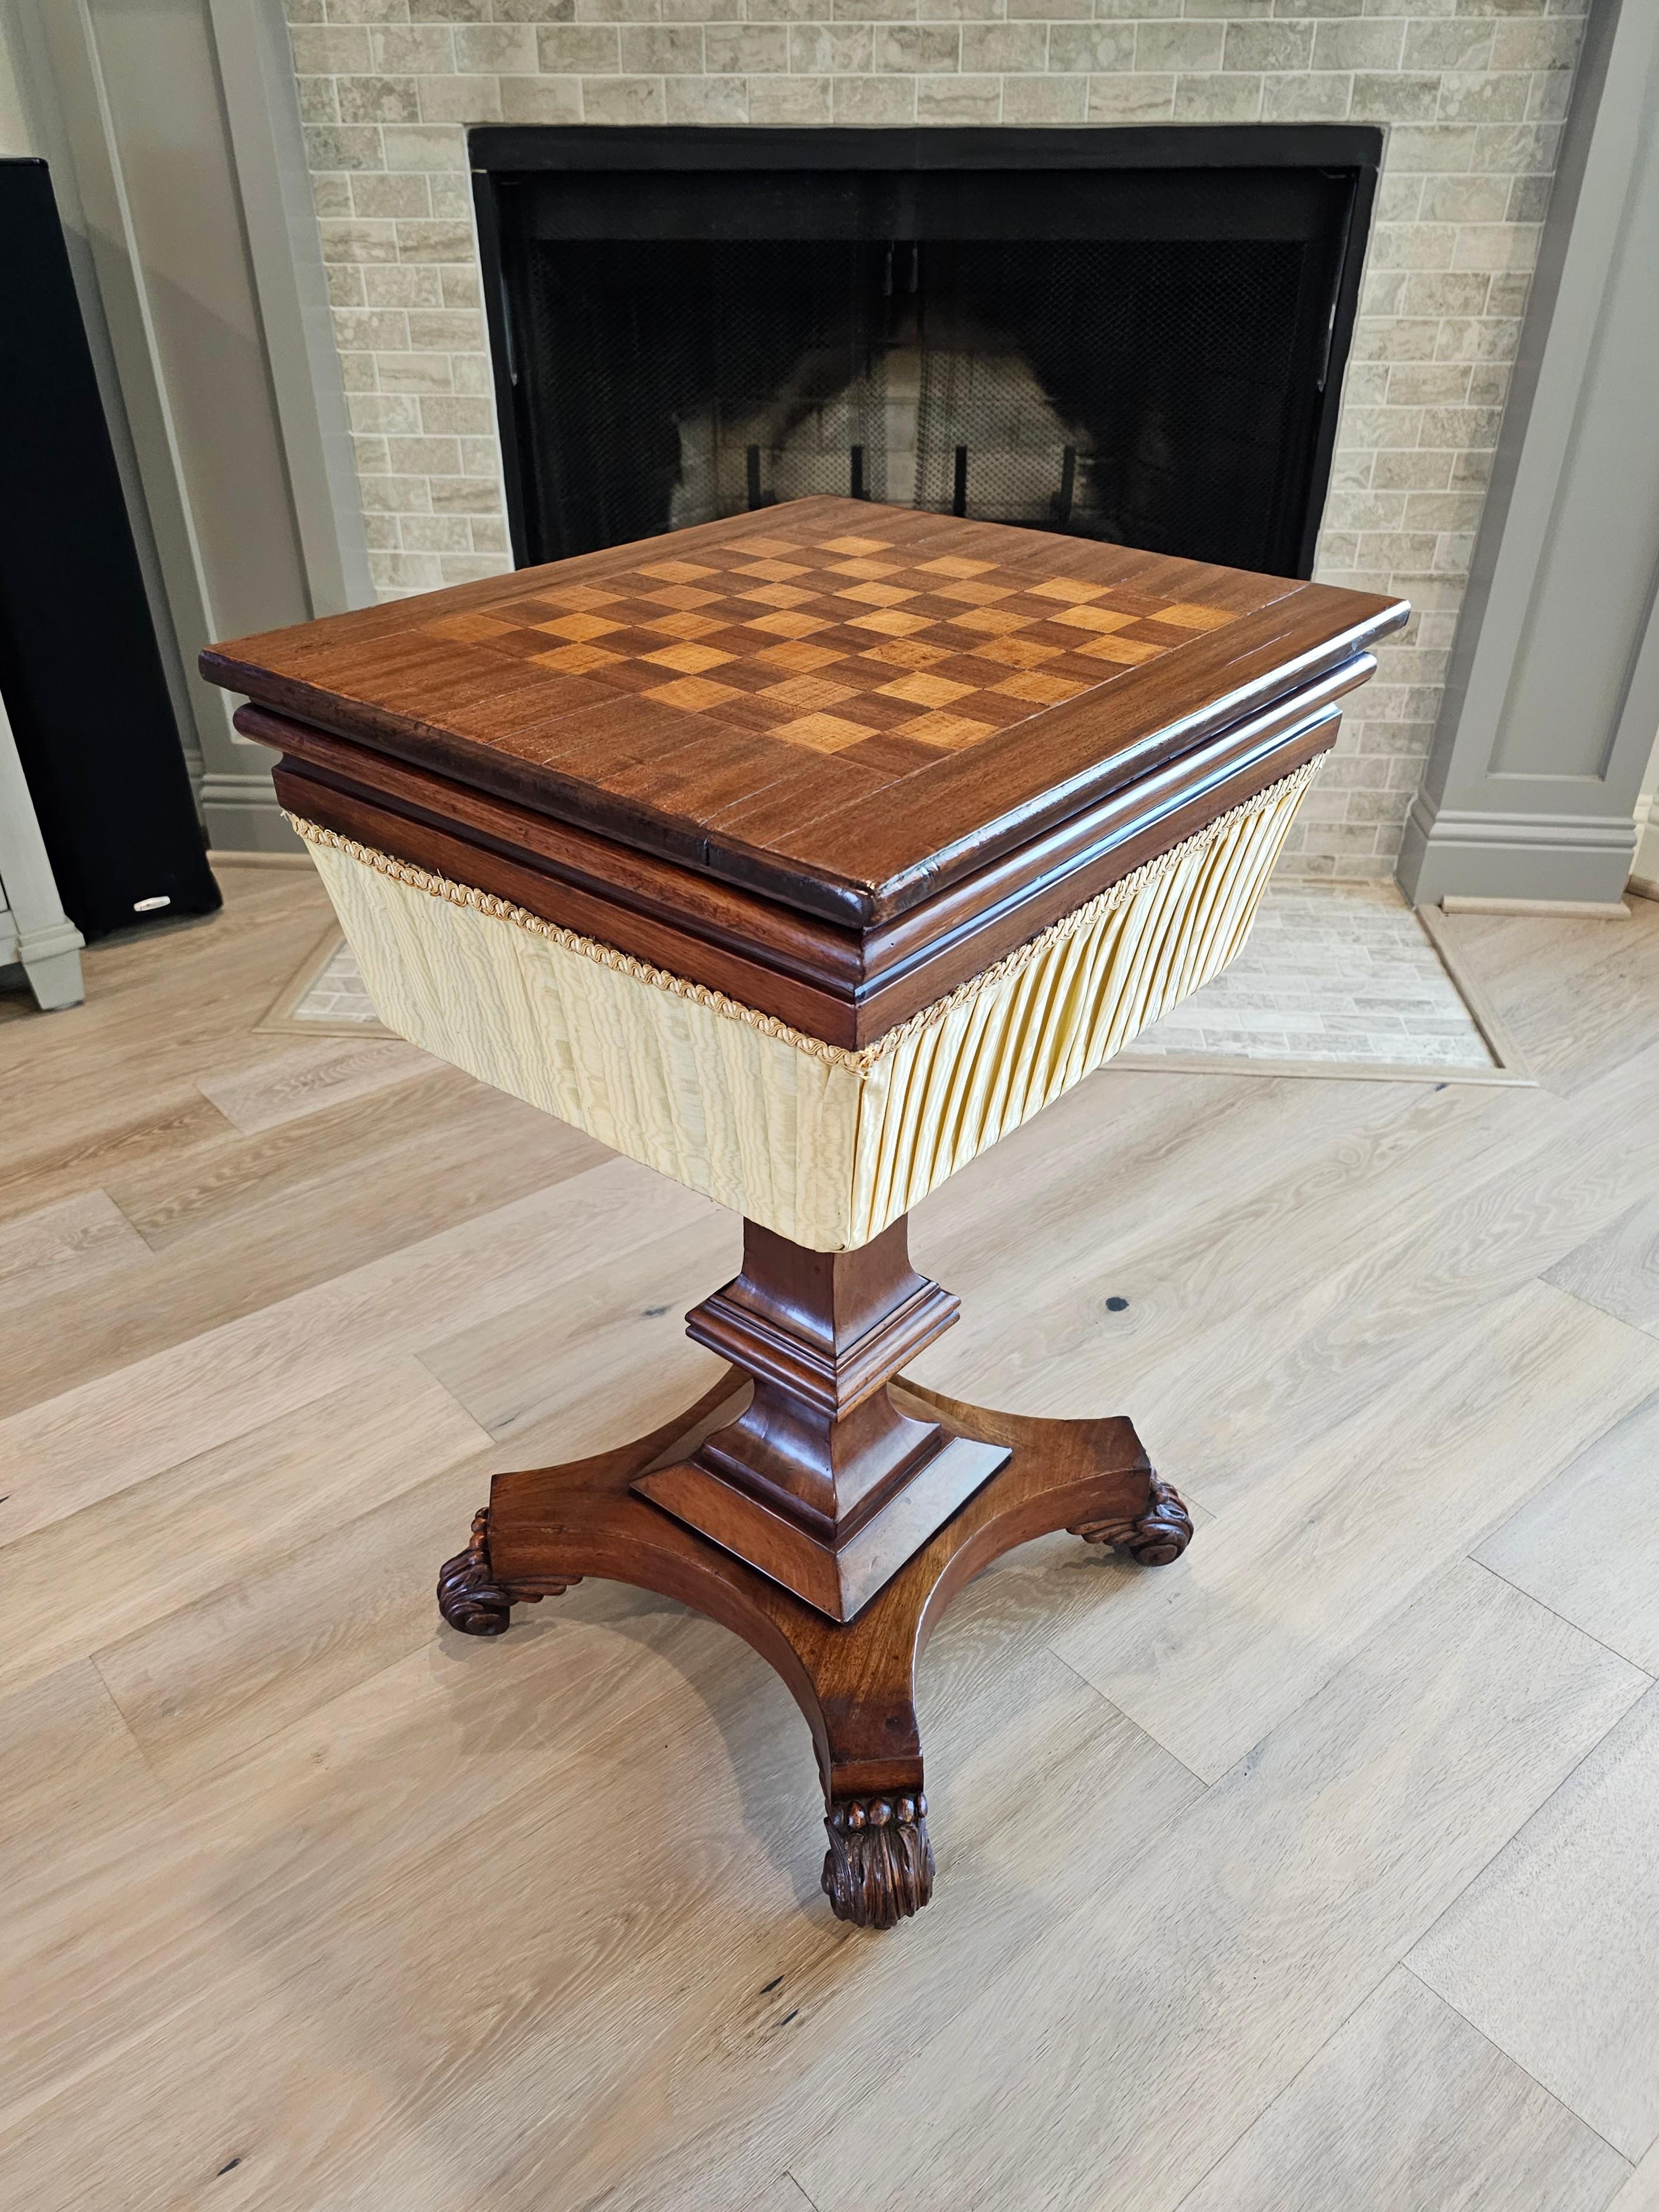 A period William IV English mahogany sewing stand work table with inlaid chessboard top. circa 1830s

Combining sophisticated elegance, warmth, and functional design, this outstanding example was born in England in the mid-19th century, exquisitely